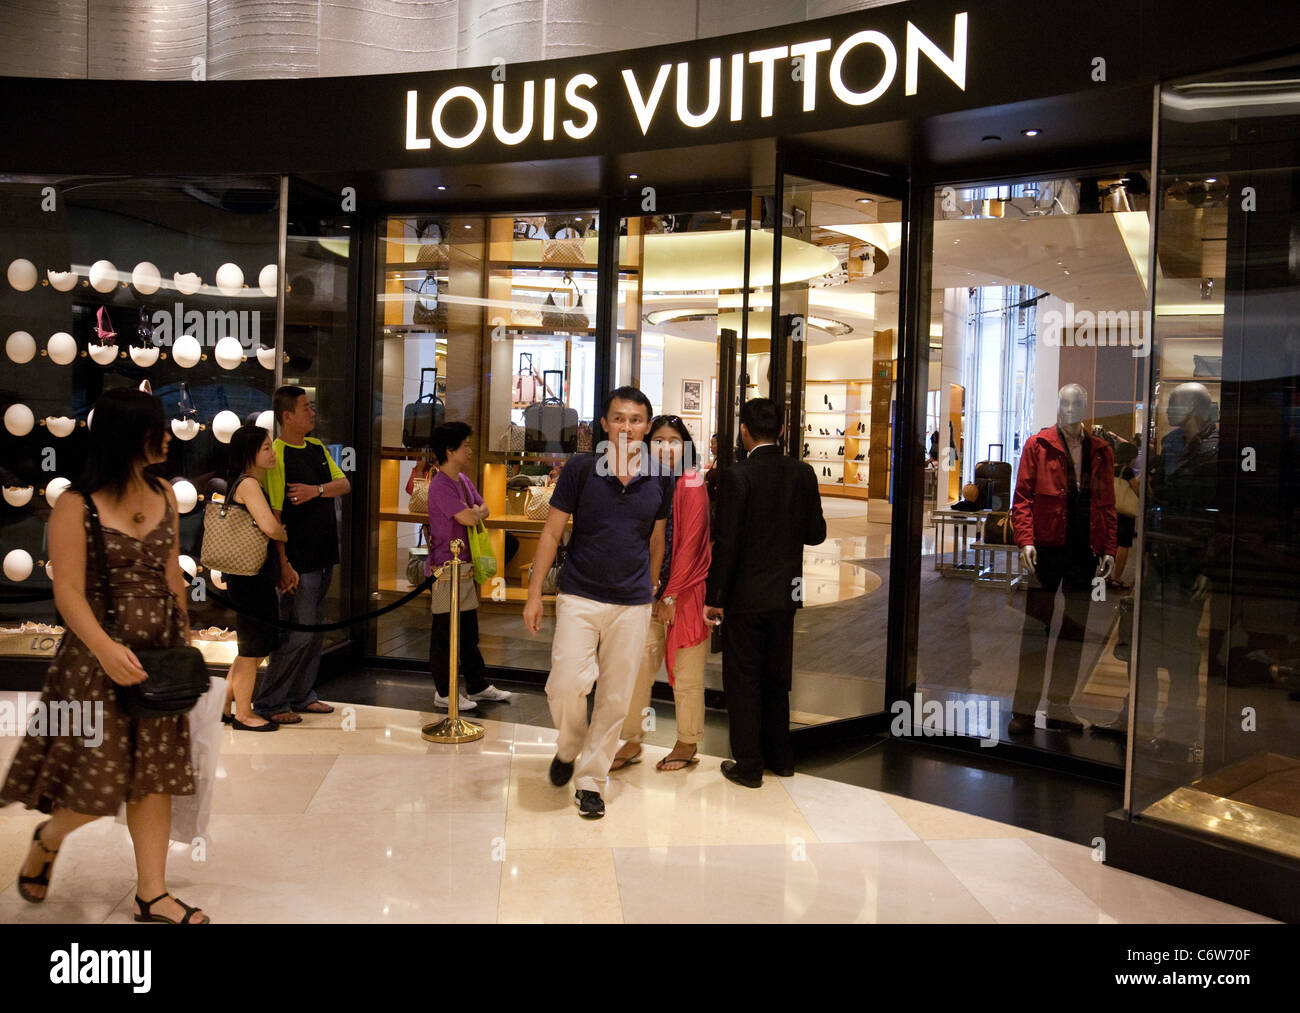 Louis Vuitton Singapore High Resolution Stock Photography and Images - Alamy